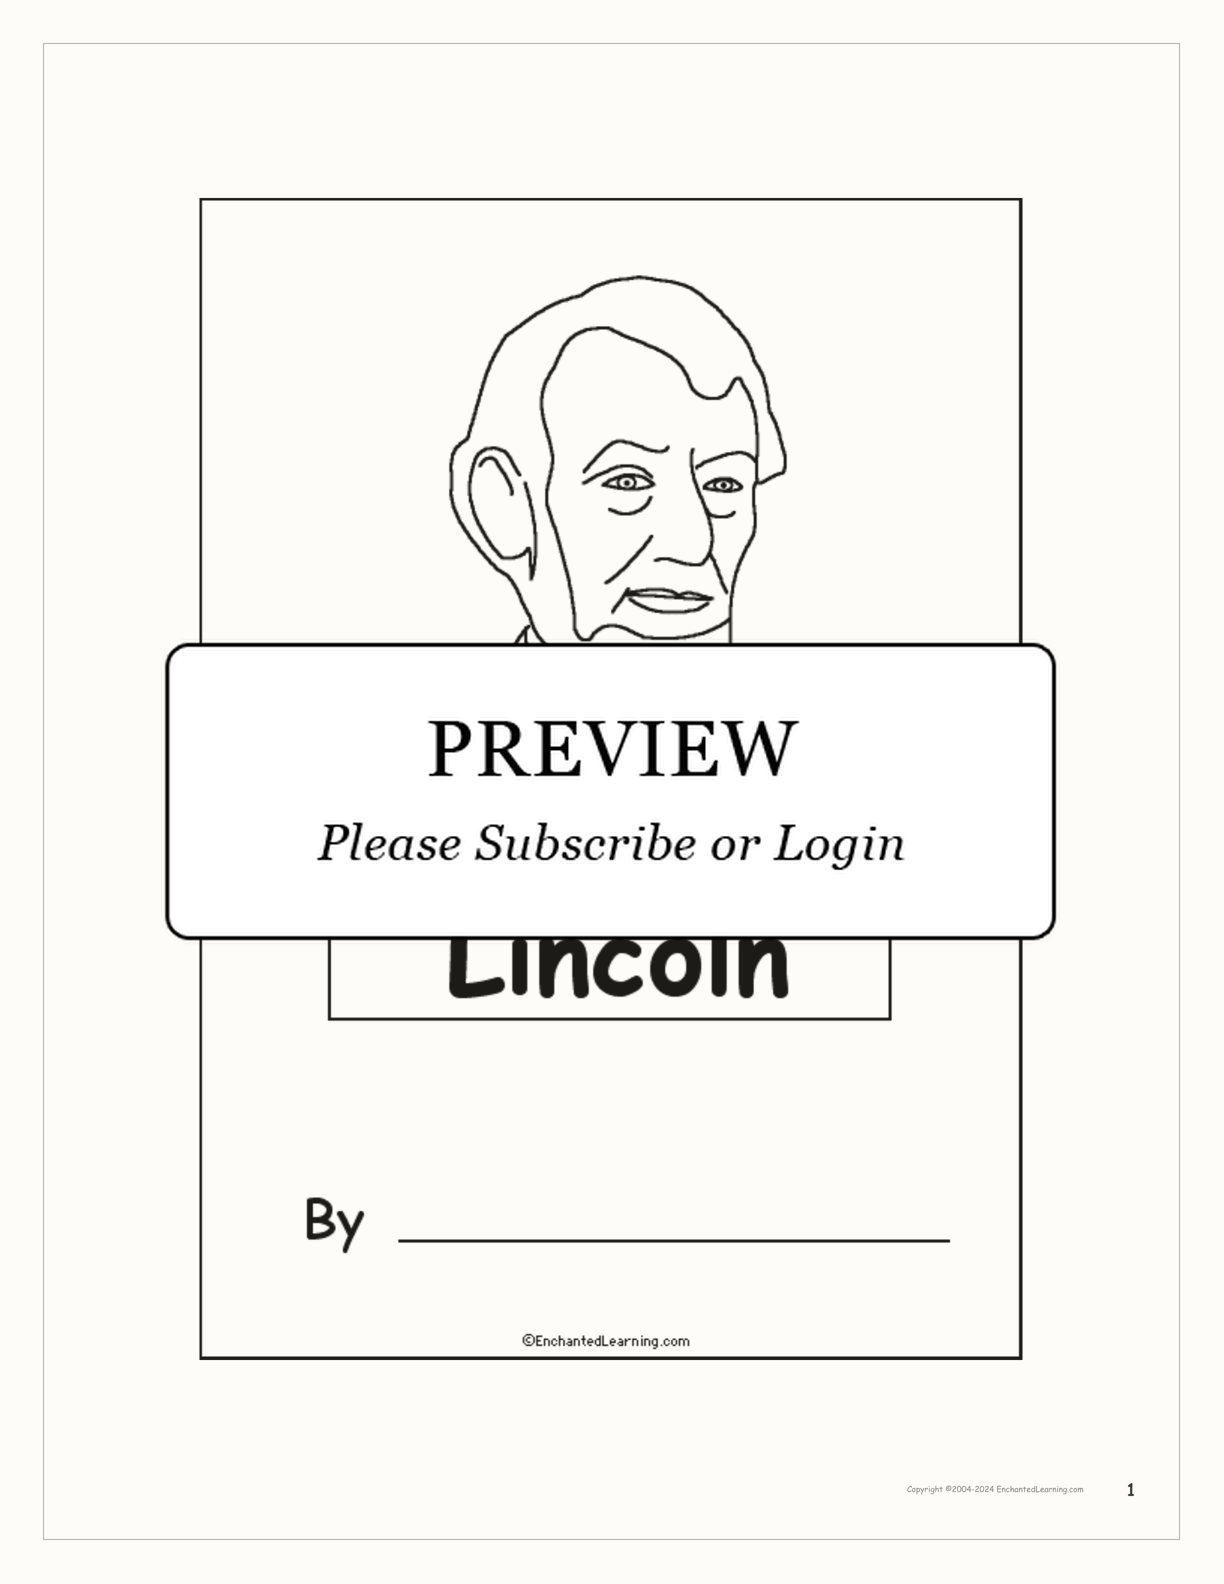 Abraham Lincoln Book interactive printout page 1